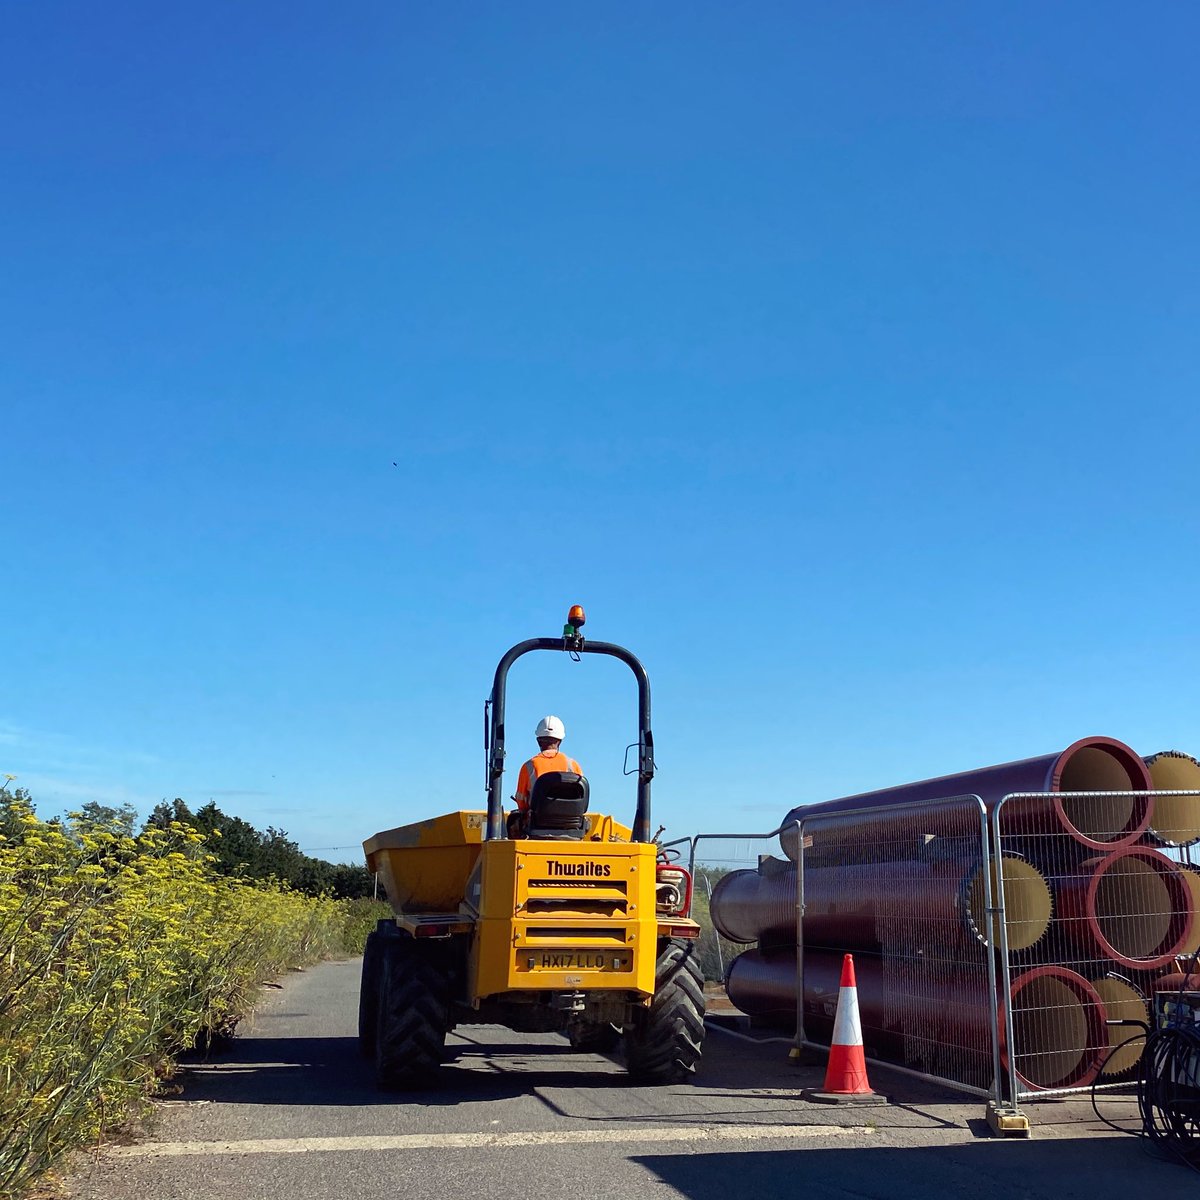 New pipes at Pegwell Bay. This is a major operation but what is happening is far from transparent. 
.
.
.
.
#pegwellbay #ramsarsite #outfallpipes #naturereserve #cliffsend #manstonairport #manston #SSSI #Specialprotectionarea #sandwichbay #thanetcoast #wetland #kentwildlifetrust